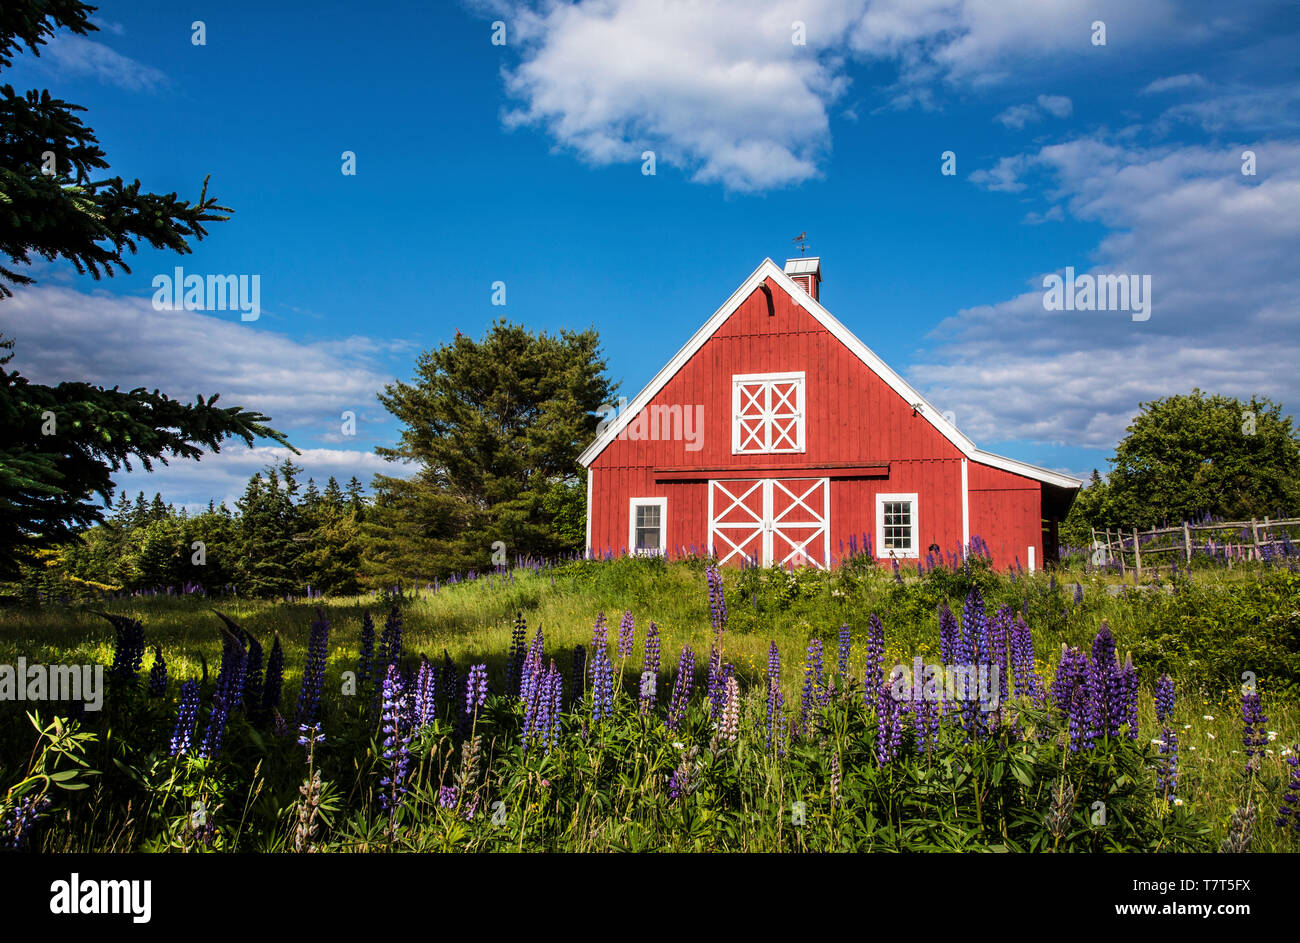 Red barn and purple lupine flowers, blue sky, Acadia National Park, Maine, New England US US spring farm scene  FS 11.46 MB  300ppi Stock Photo